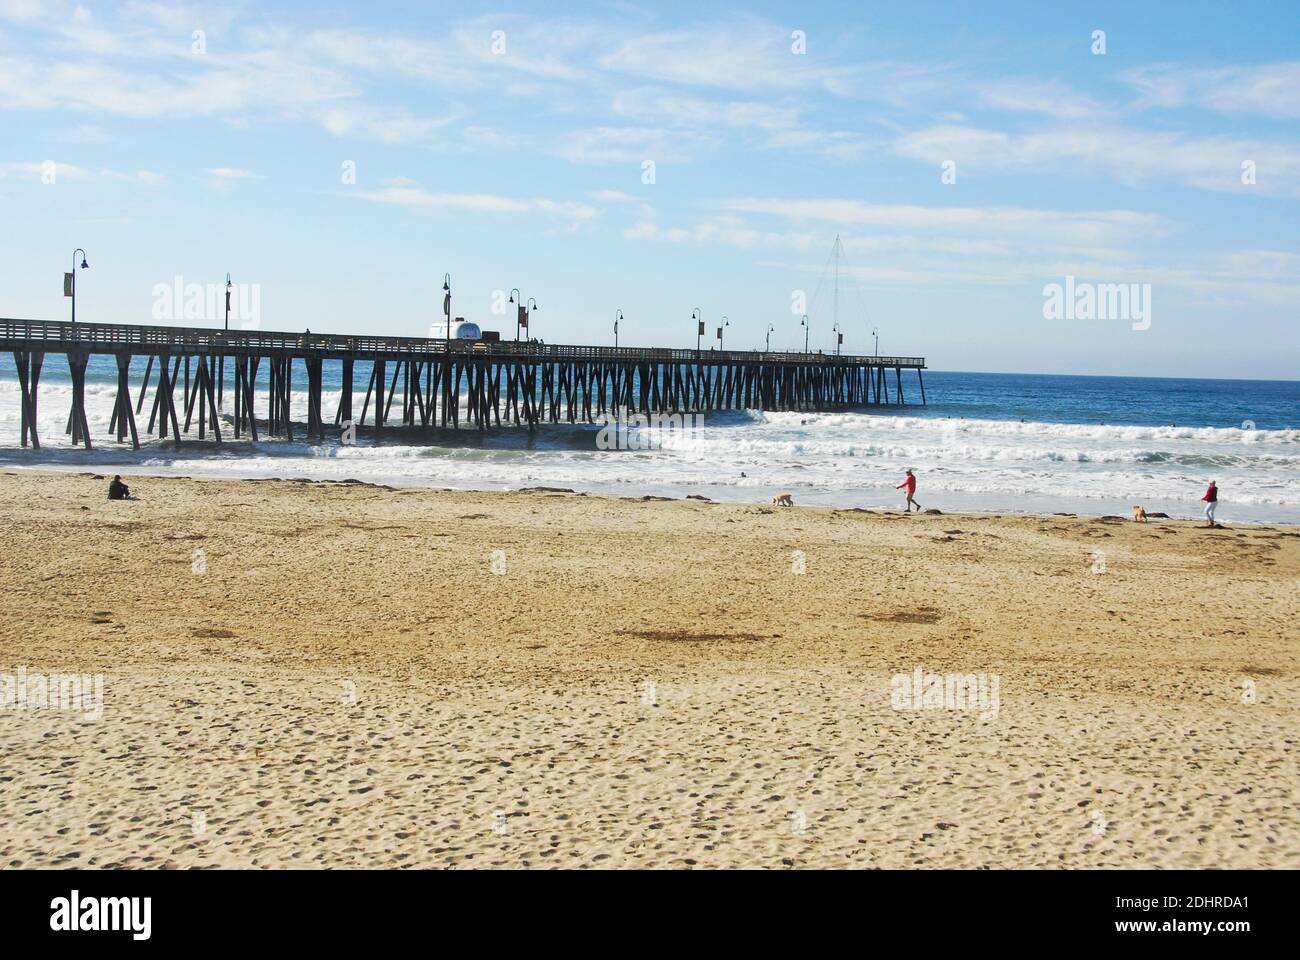 Pier at Pismo Beach in San Luis Obispo County, California, famous for its Pismo Clams, beaches, and sand dunes. Stock Photo